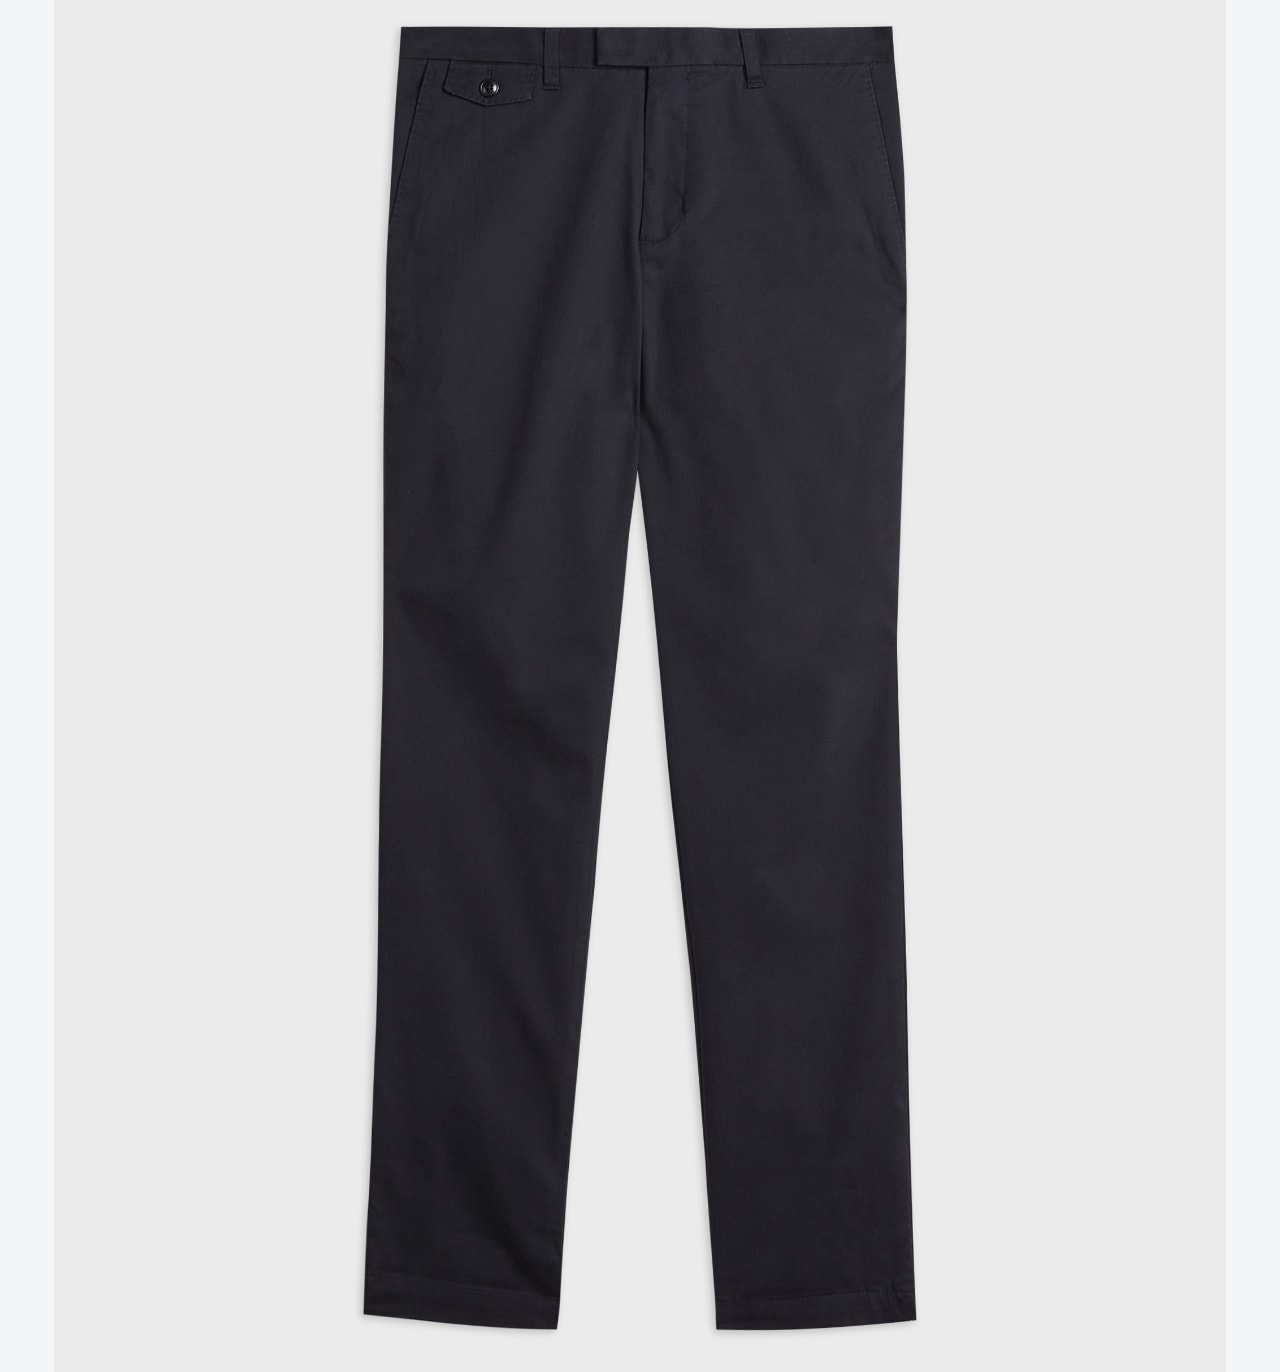 Irvine fit trousers